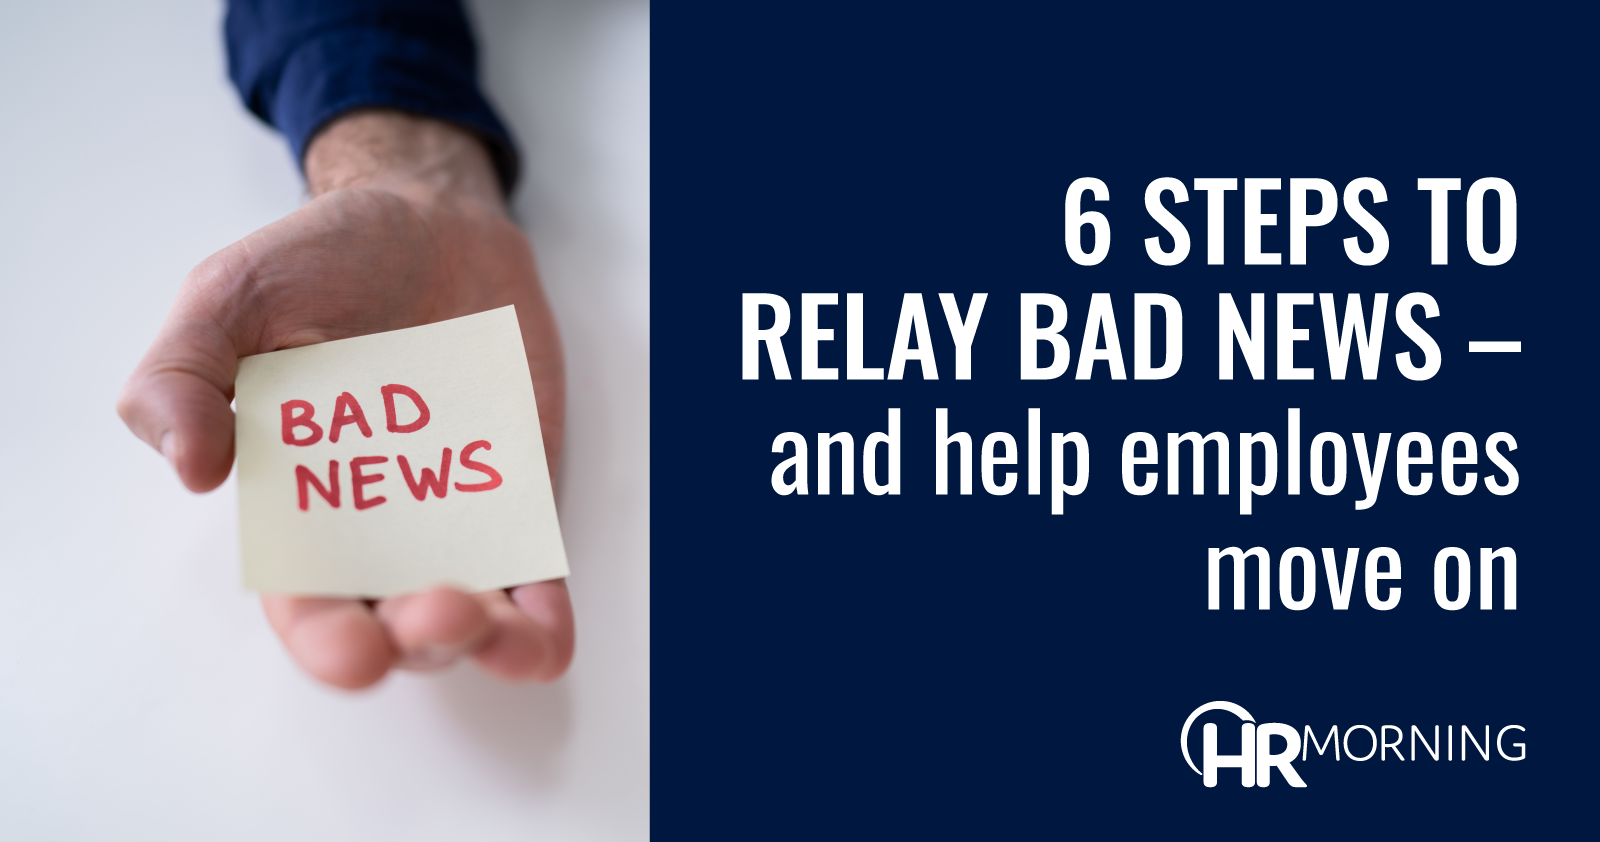 6 Steps To Relay Bad News And Help Employees Move On